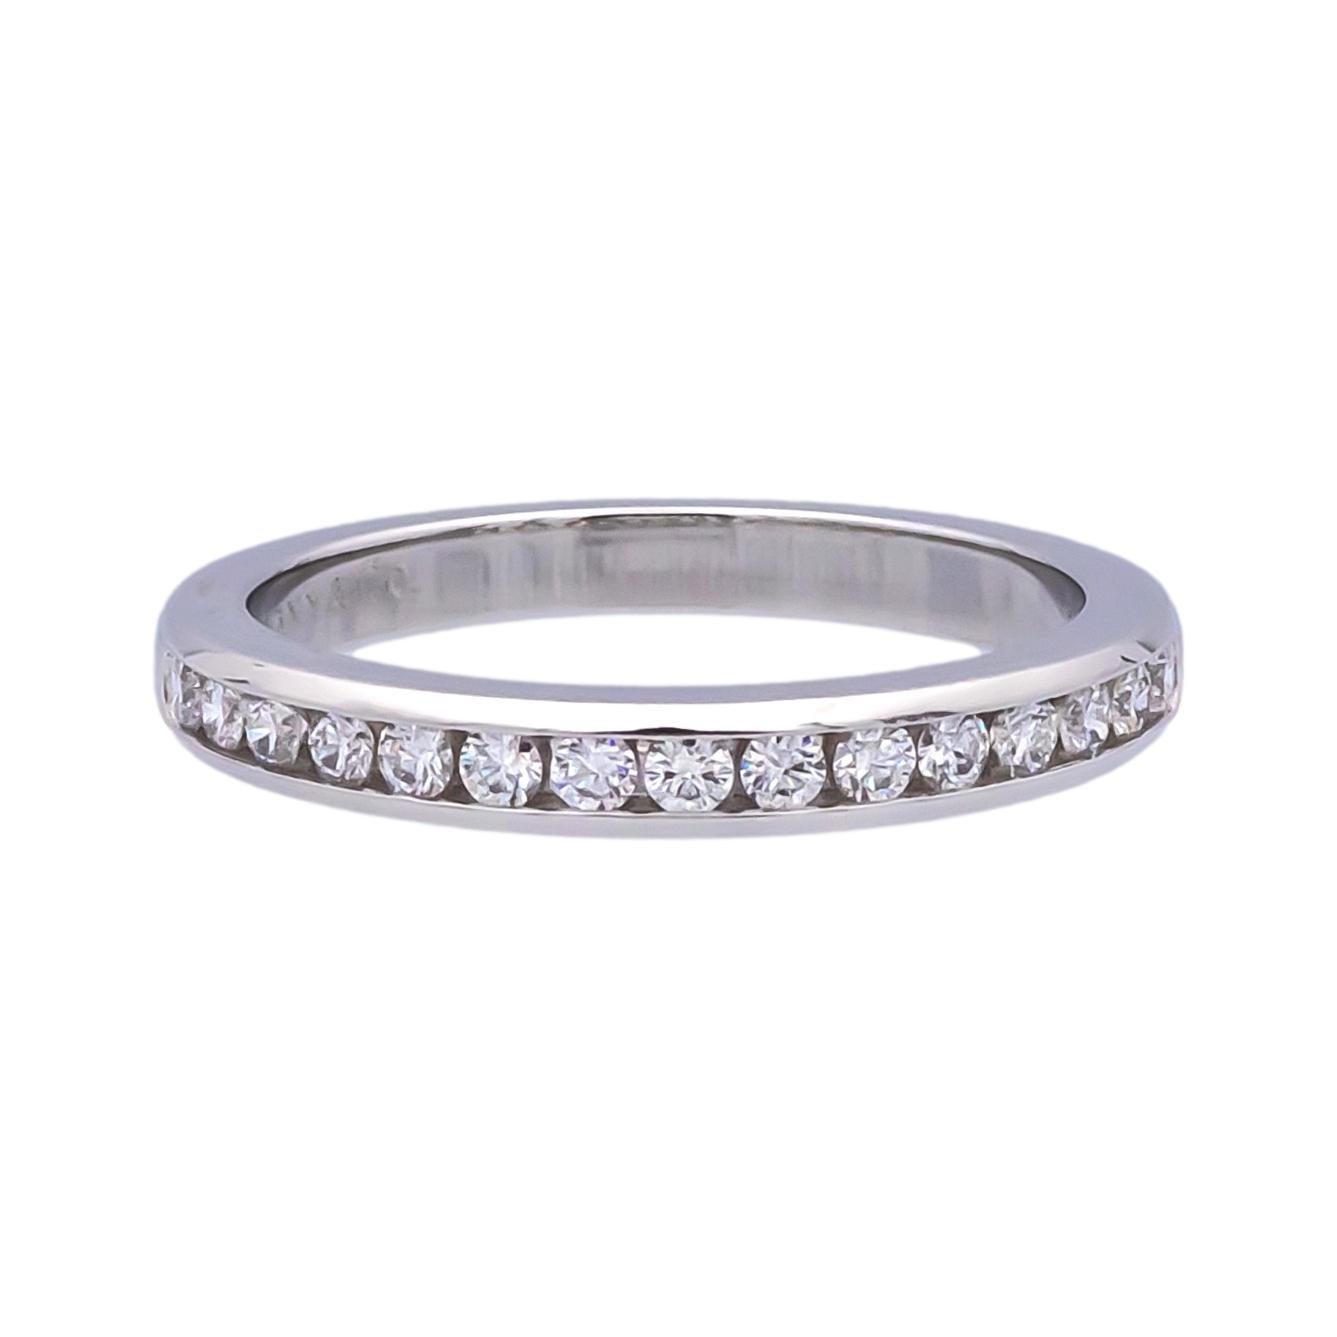 Tiffany & Co. wedding/anniversary band finely crafted in platinum with 15 channel set round brilliant cut diamonds weighing 0.24 carats total weight ranging D-G color and IF (Internally Flawless)- VS2 clarity. Accompanied by Tiffany appraisal.